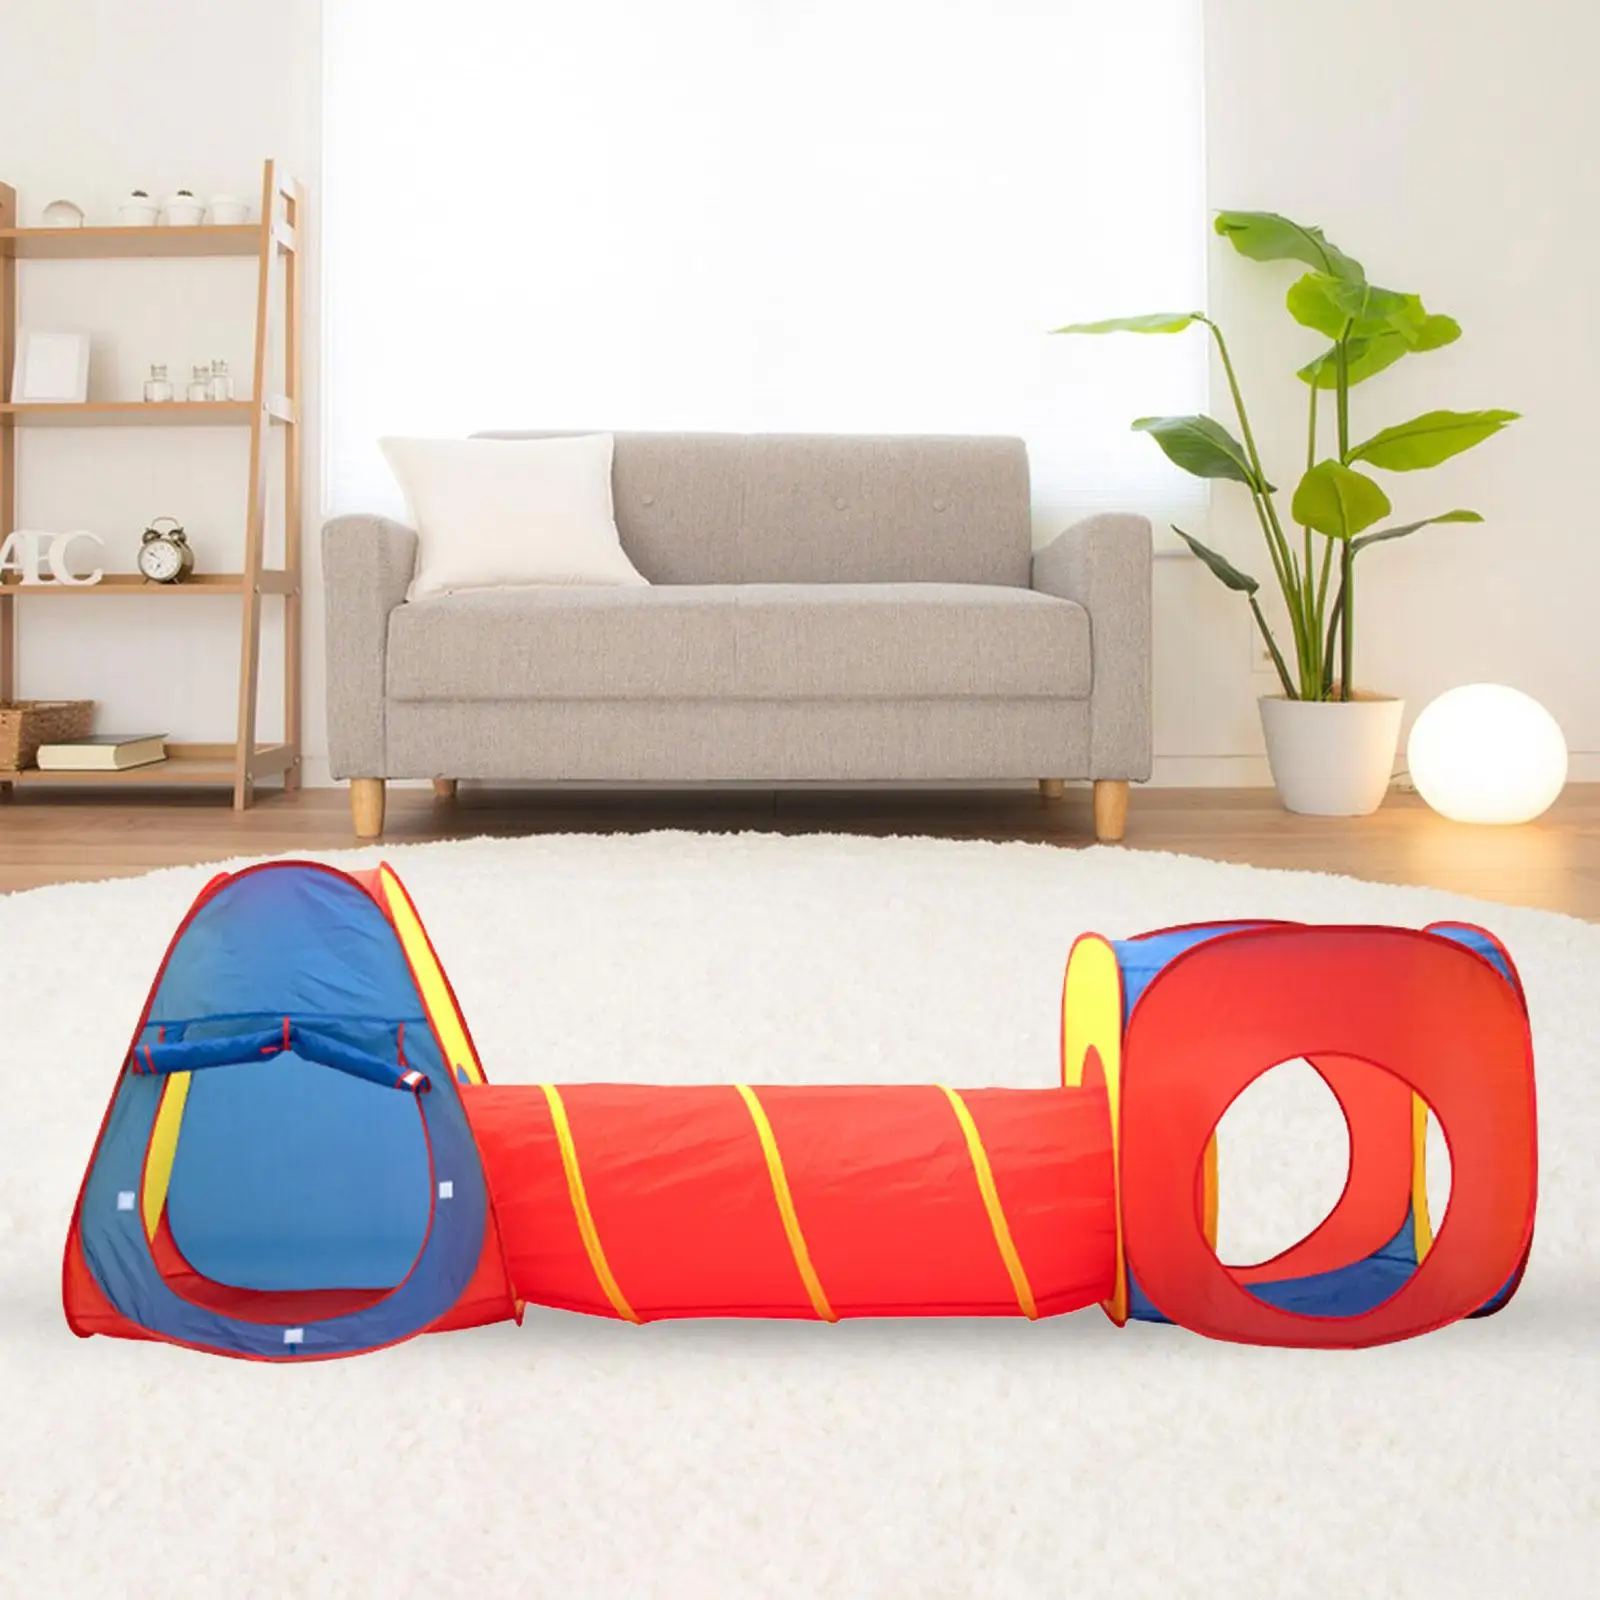 Kids Play Tents with Tunnels Gym Activity Also for Pets Large Foldable 3 in 1 Playhouse for Playground, Toddlers, Boys Girls